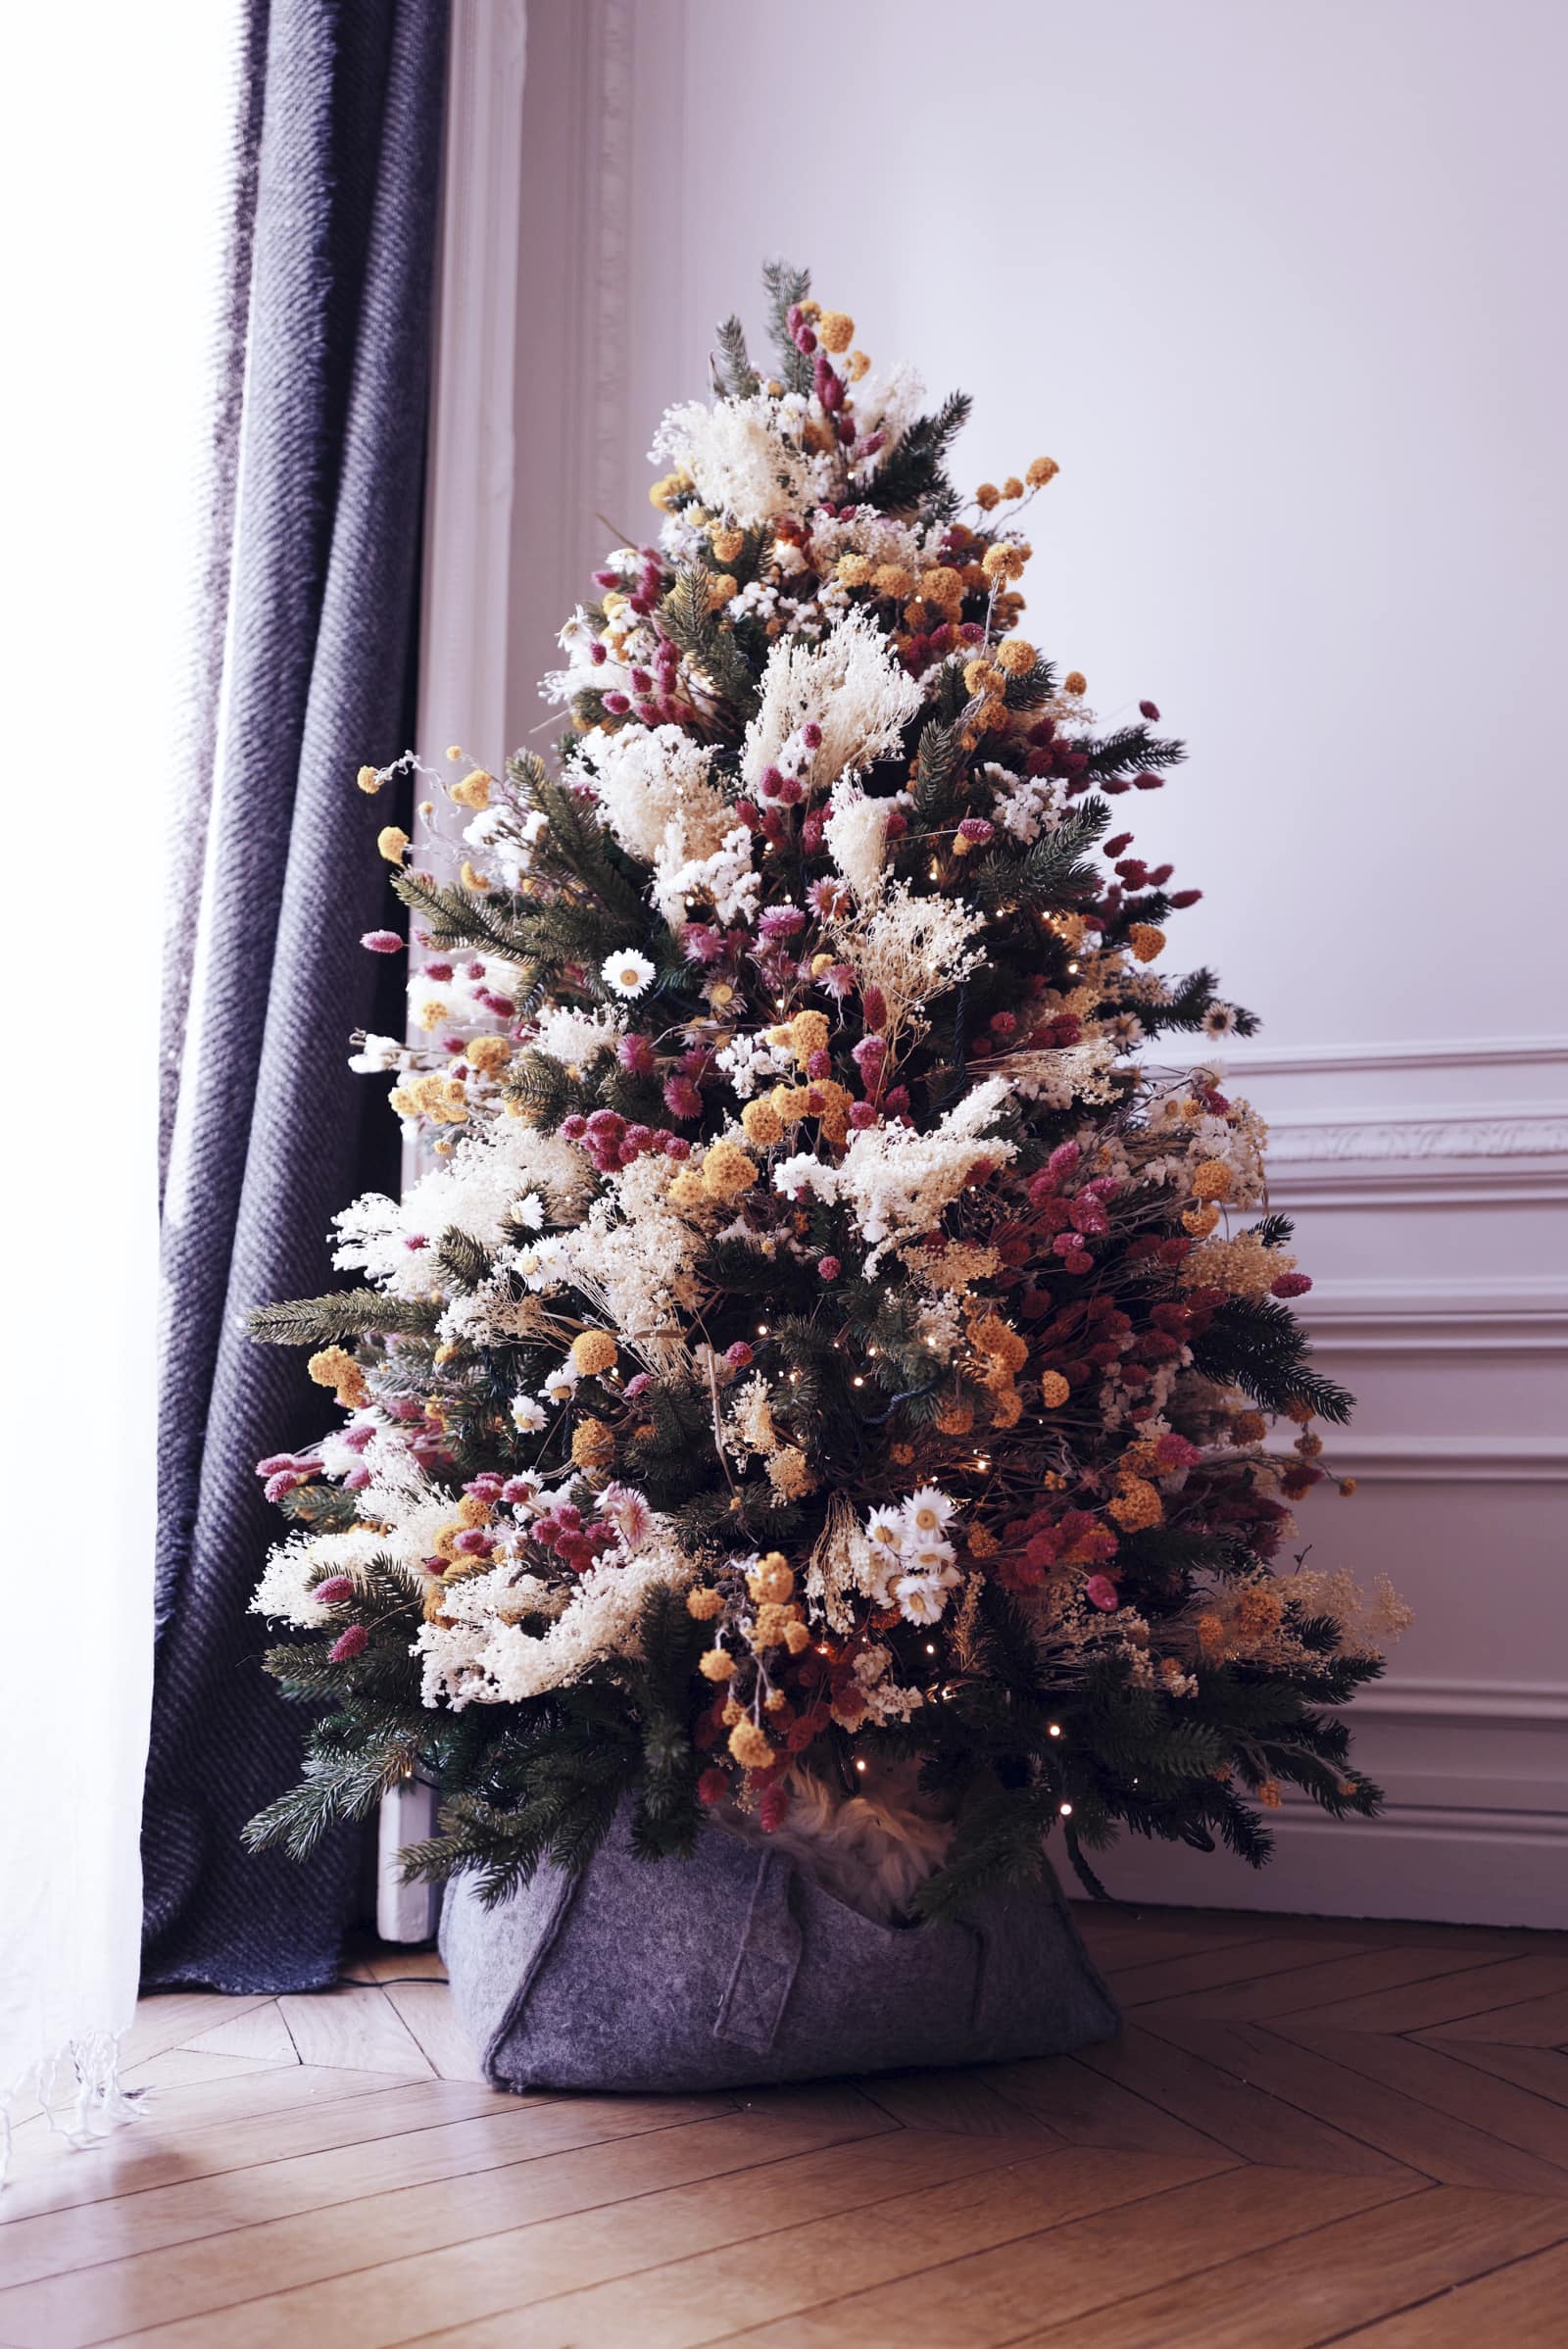 Christmas tree idea featuring a tree dorated with dried flowers